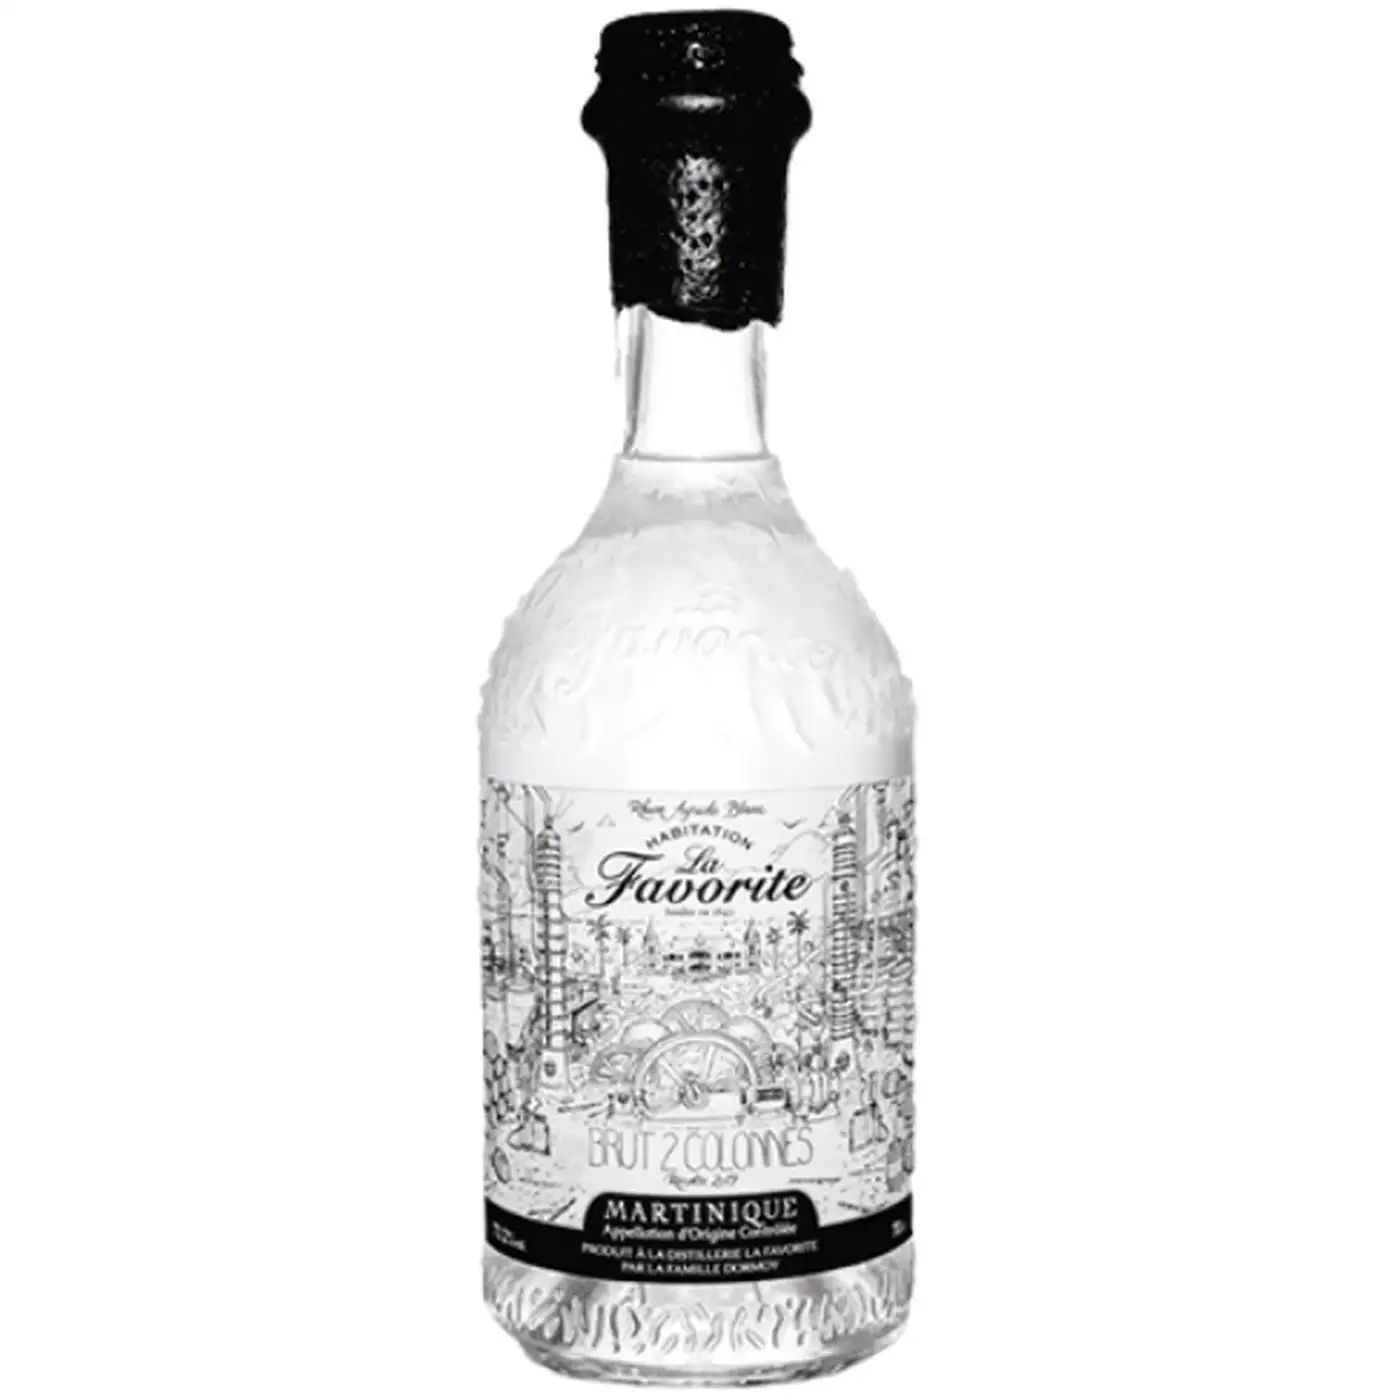 Image of the front of the bottle of the rum Brut 2 Colonnes